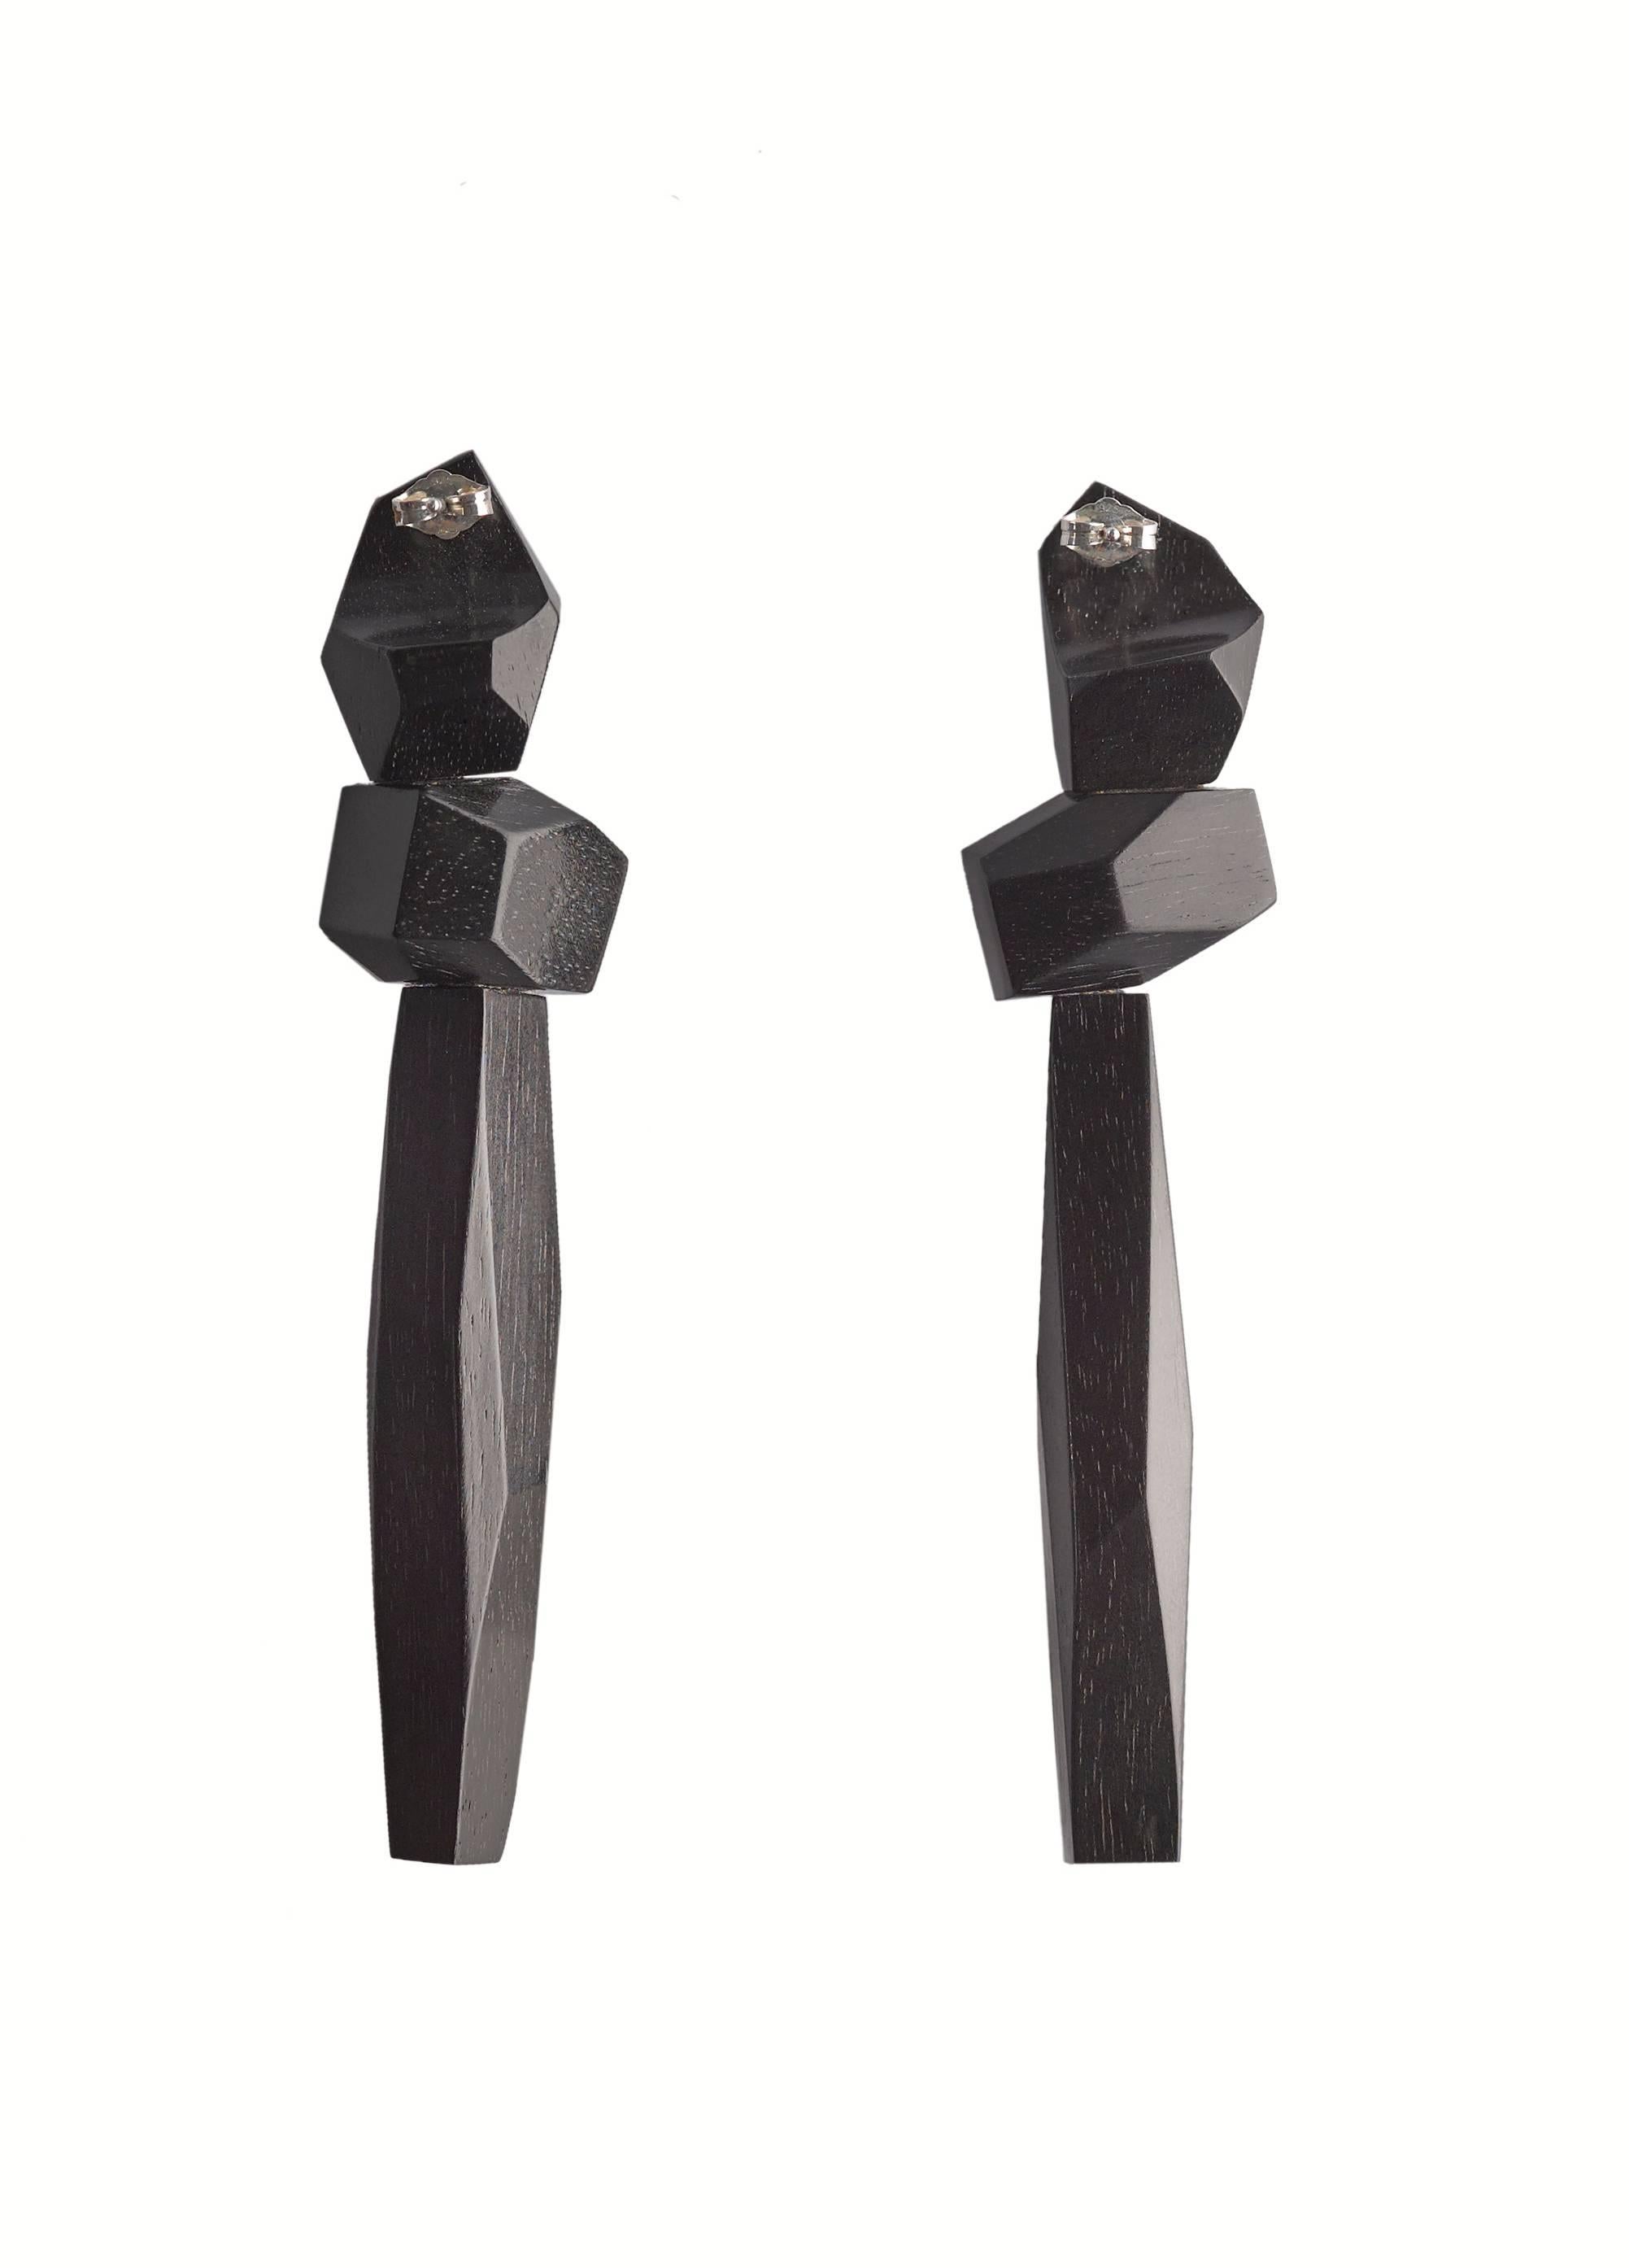 Modern Matar Hand-Carved Jet Black Ebony Block Rose Inlays Drop Earrings For Sale